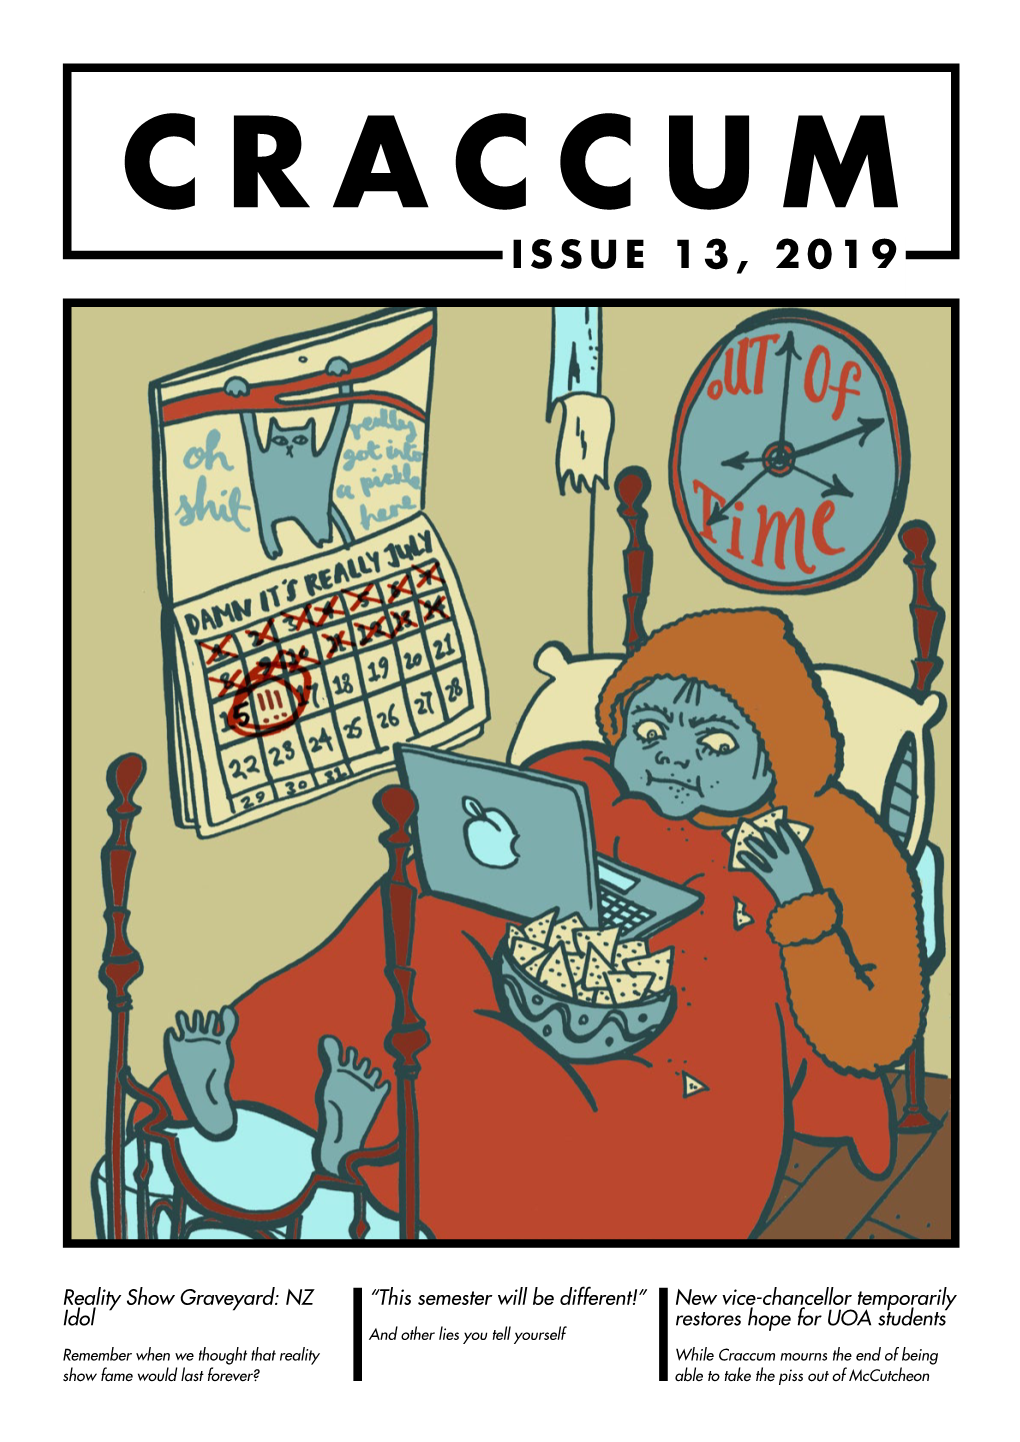 Issue 13, 2019